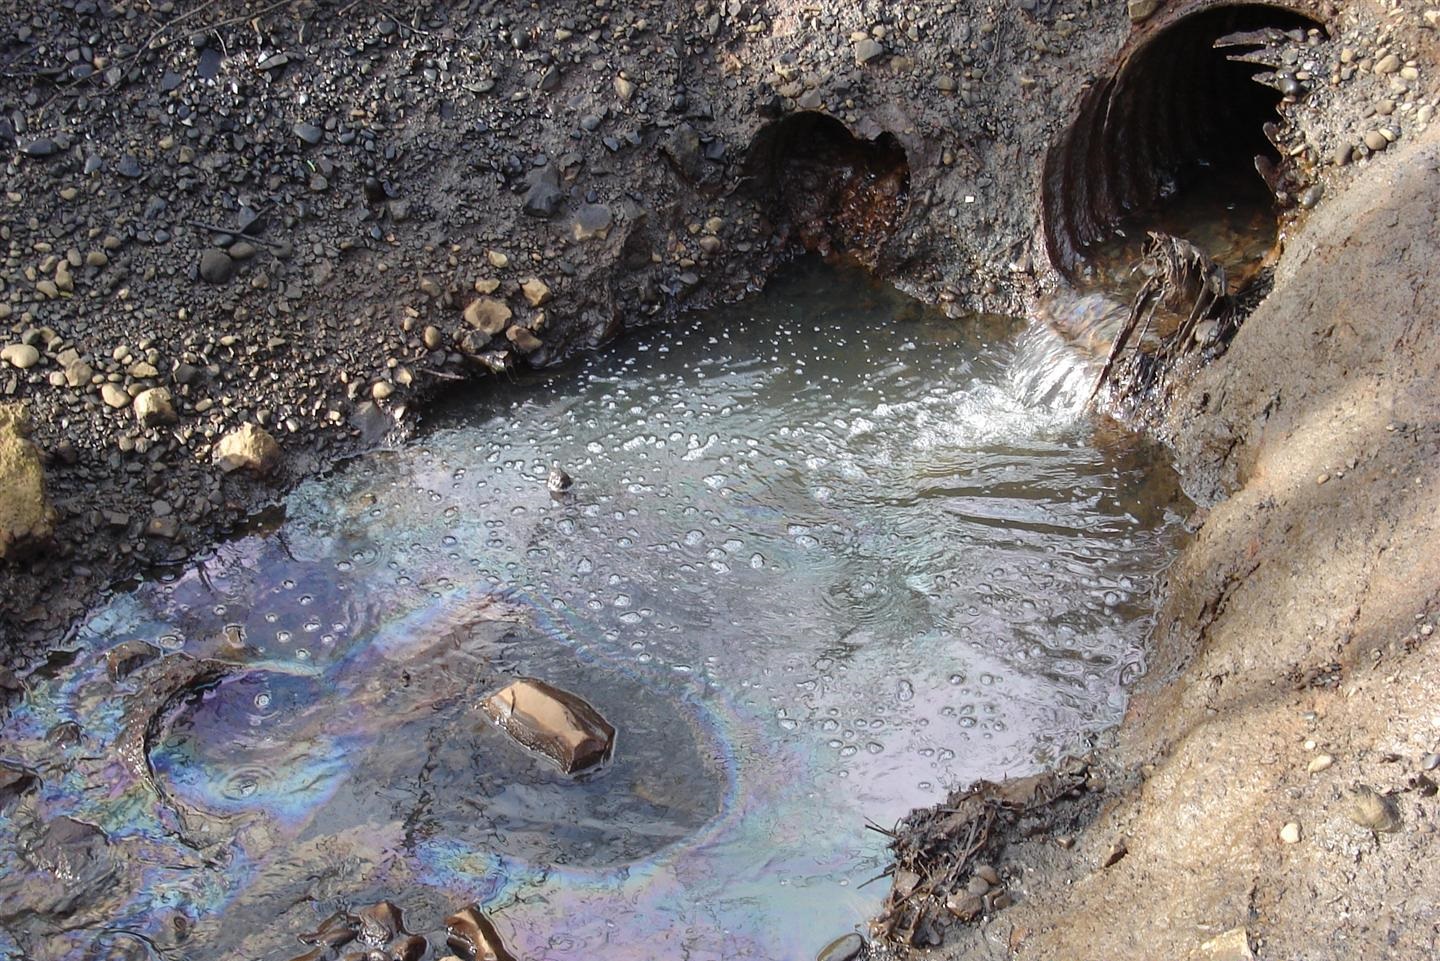 Oily water, with rainbow sheen on the surface, flows out of a culvert. into a ditch.